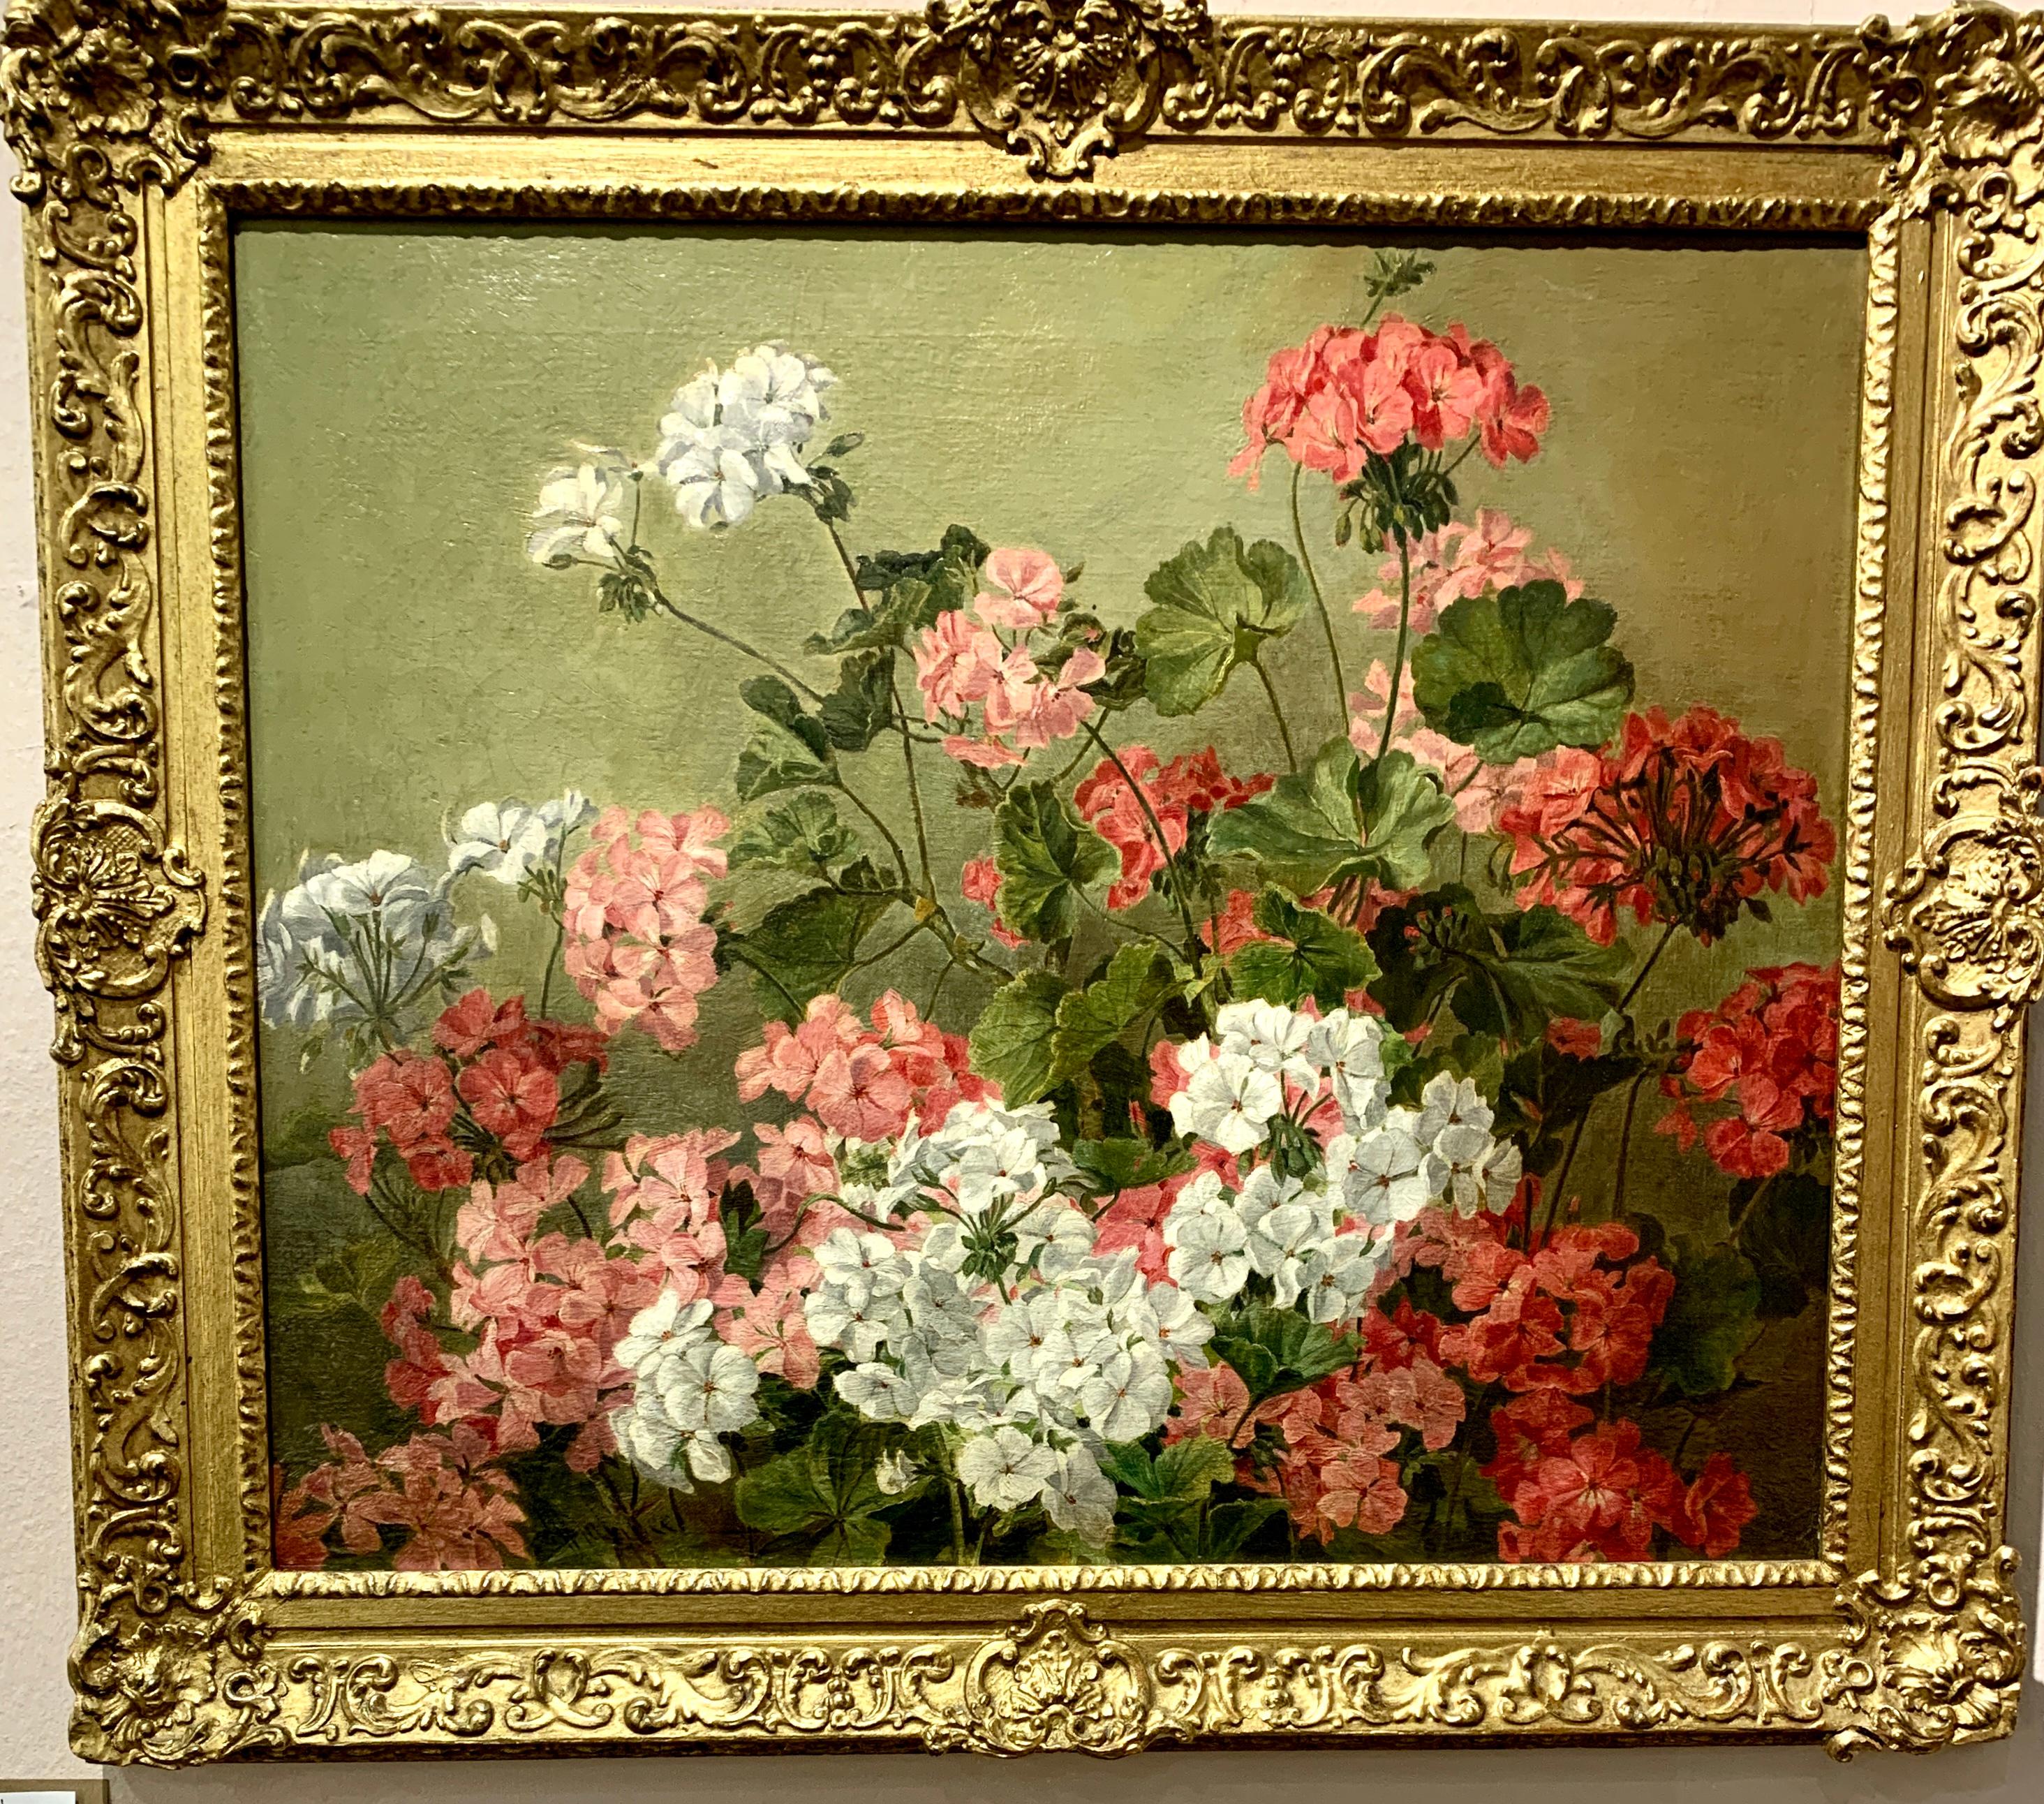 Henry Wallace Landscape Painting - 19th century Antique English study of  Pink and White Geranium Flowers